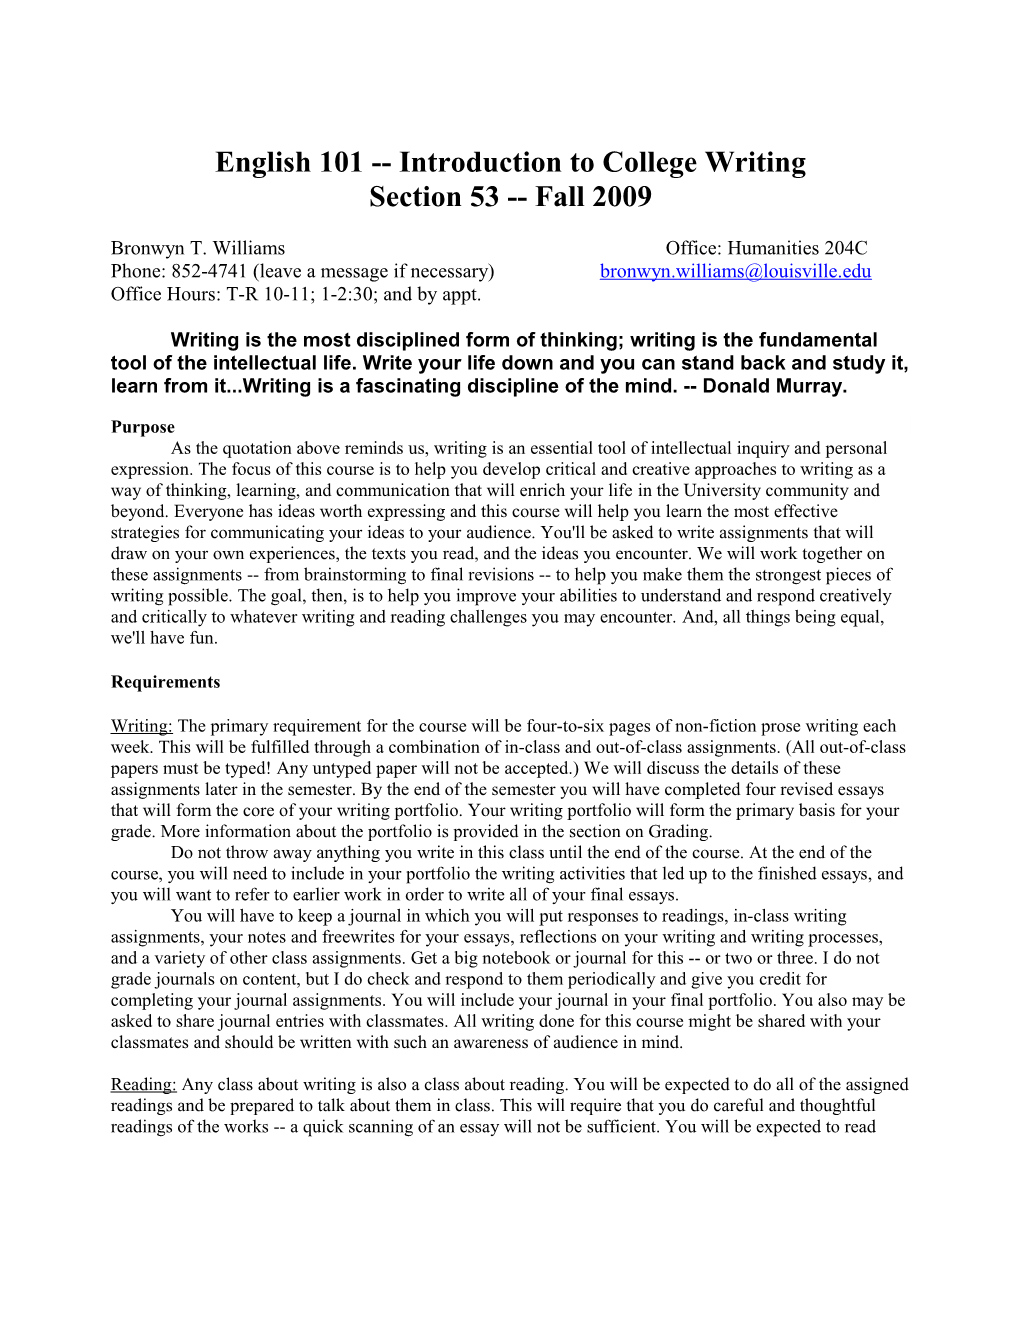 English 101 Introduction to College Writing